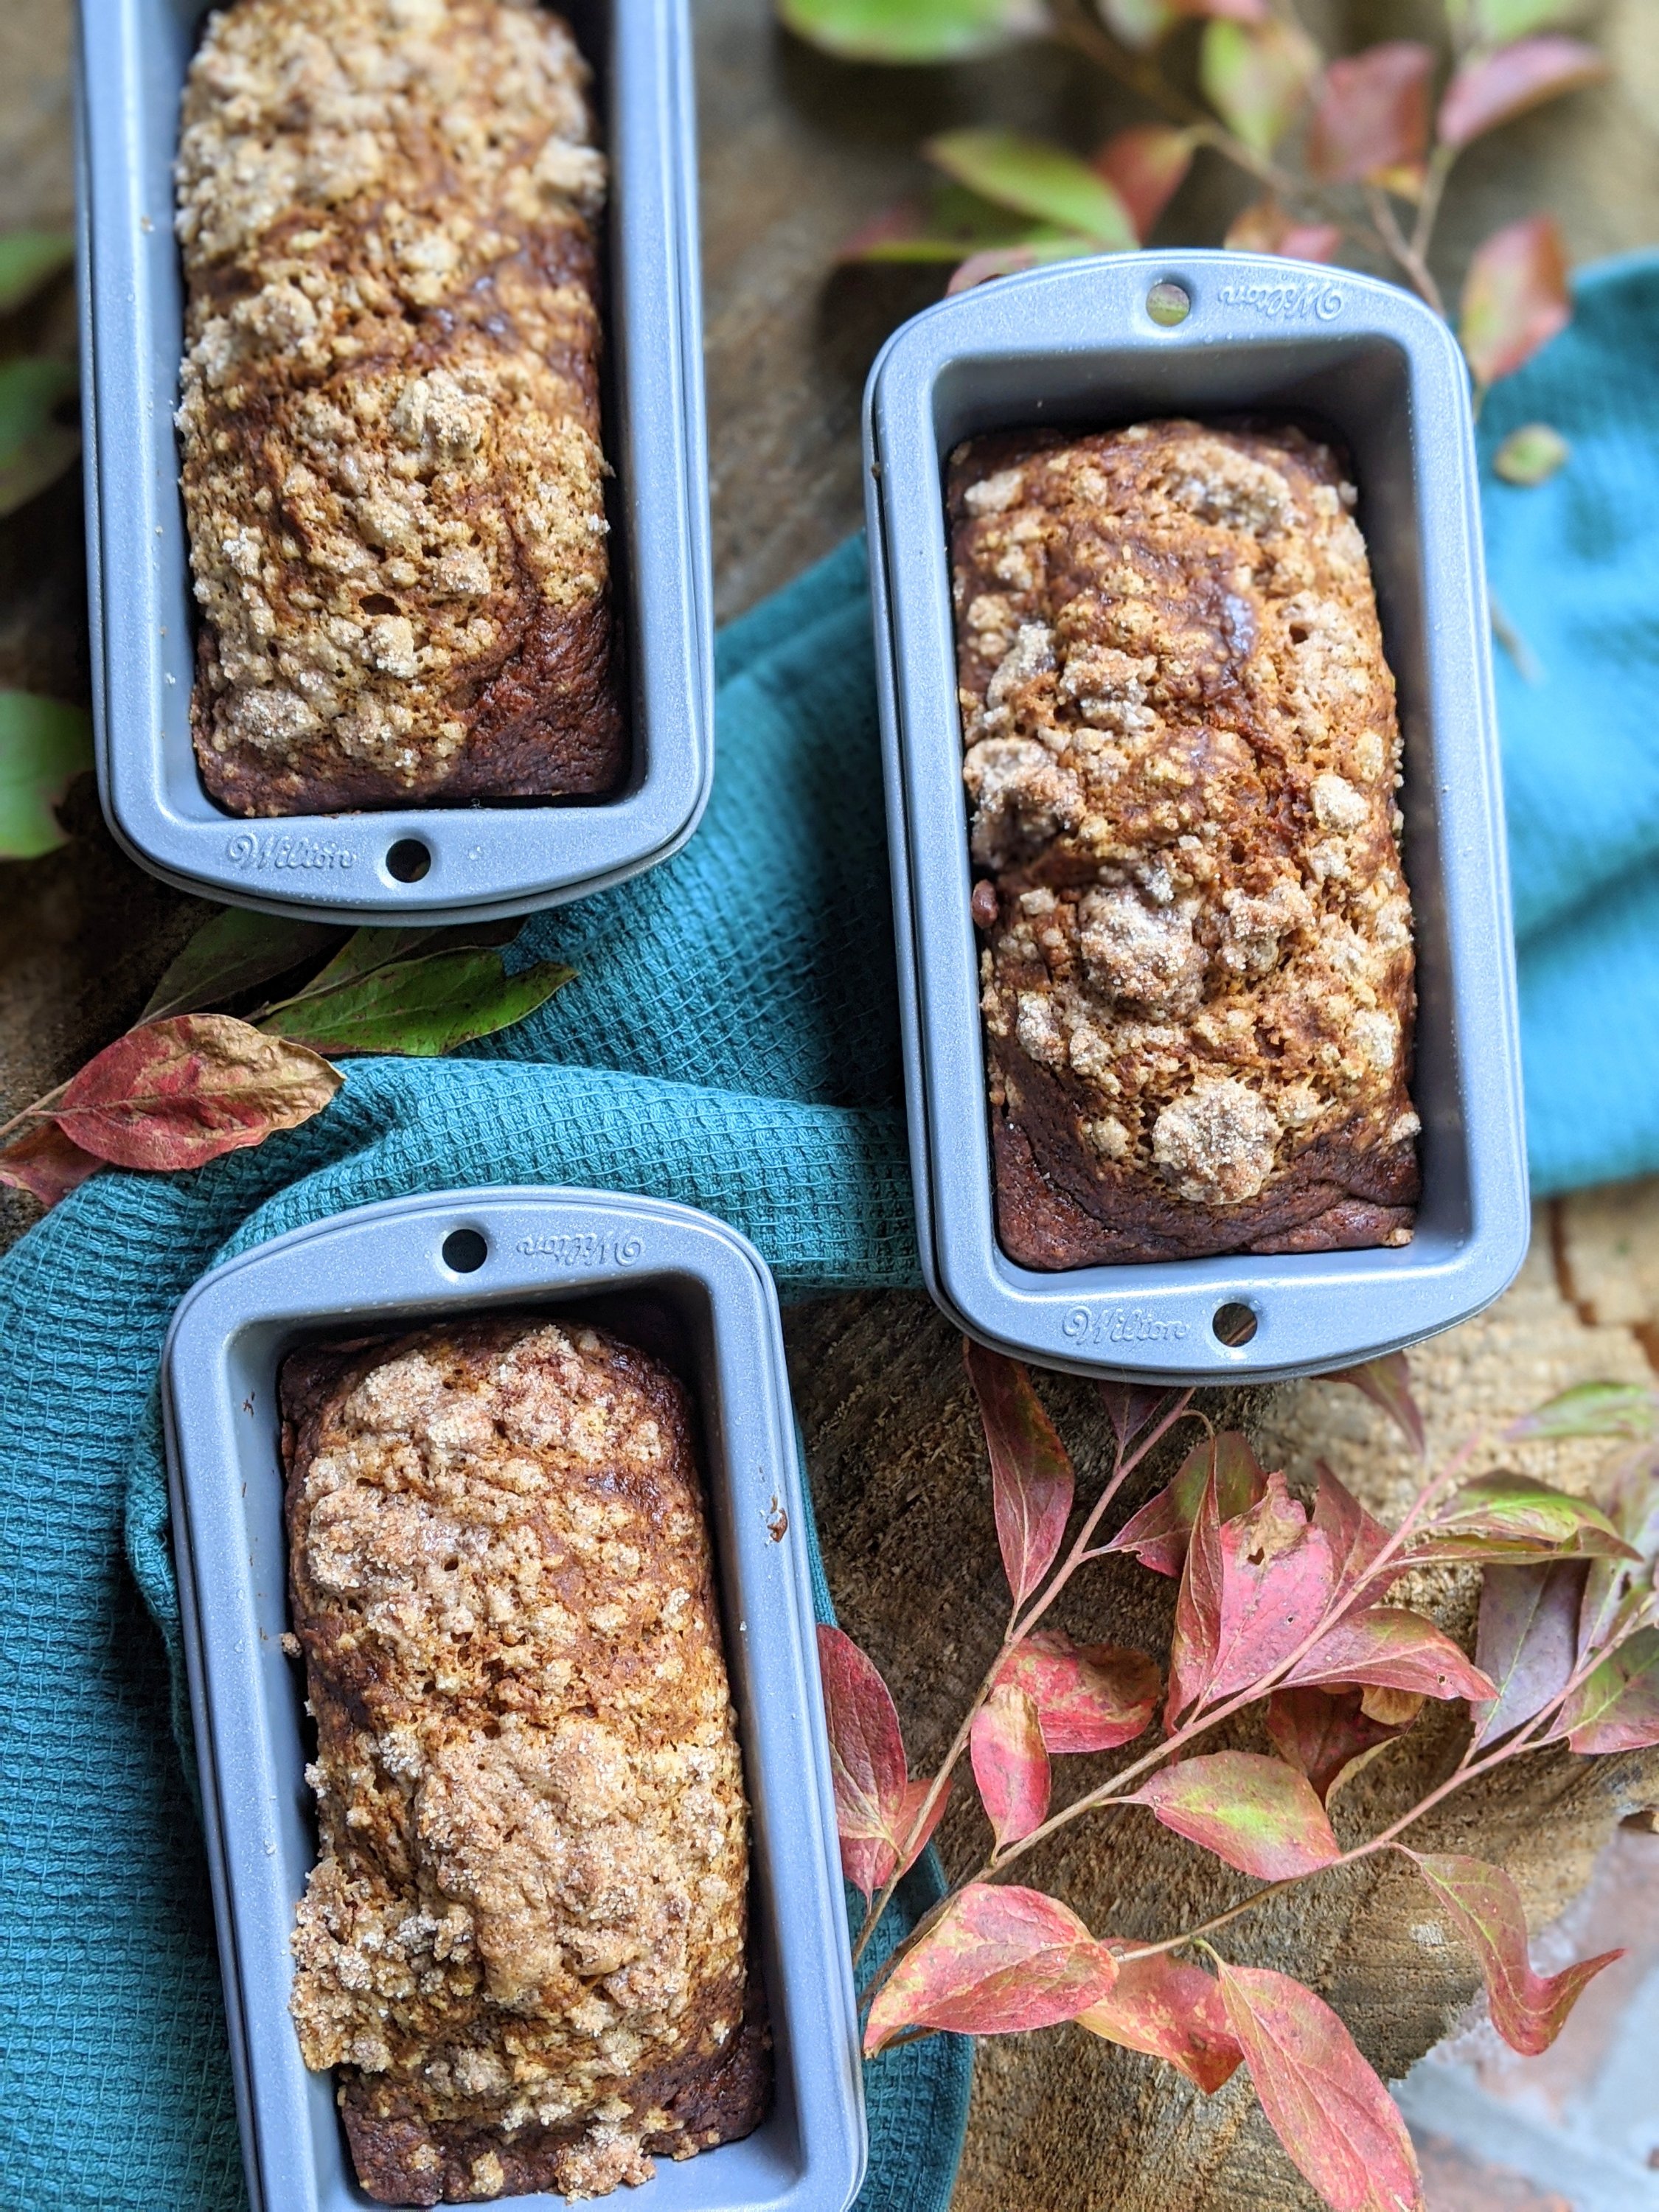 egg free pumpkin bread recipe eggless dairy free vegan vegetarian pumpkin bread with pumpkin puree made from scratch healthy fall hostess gifts to bake or make diy baking gifts